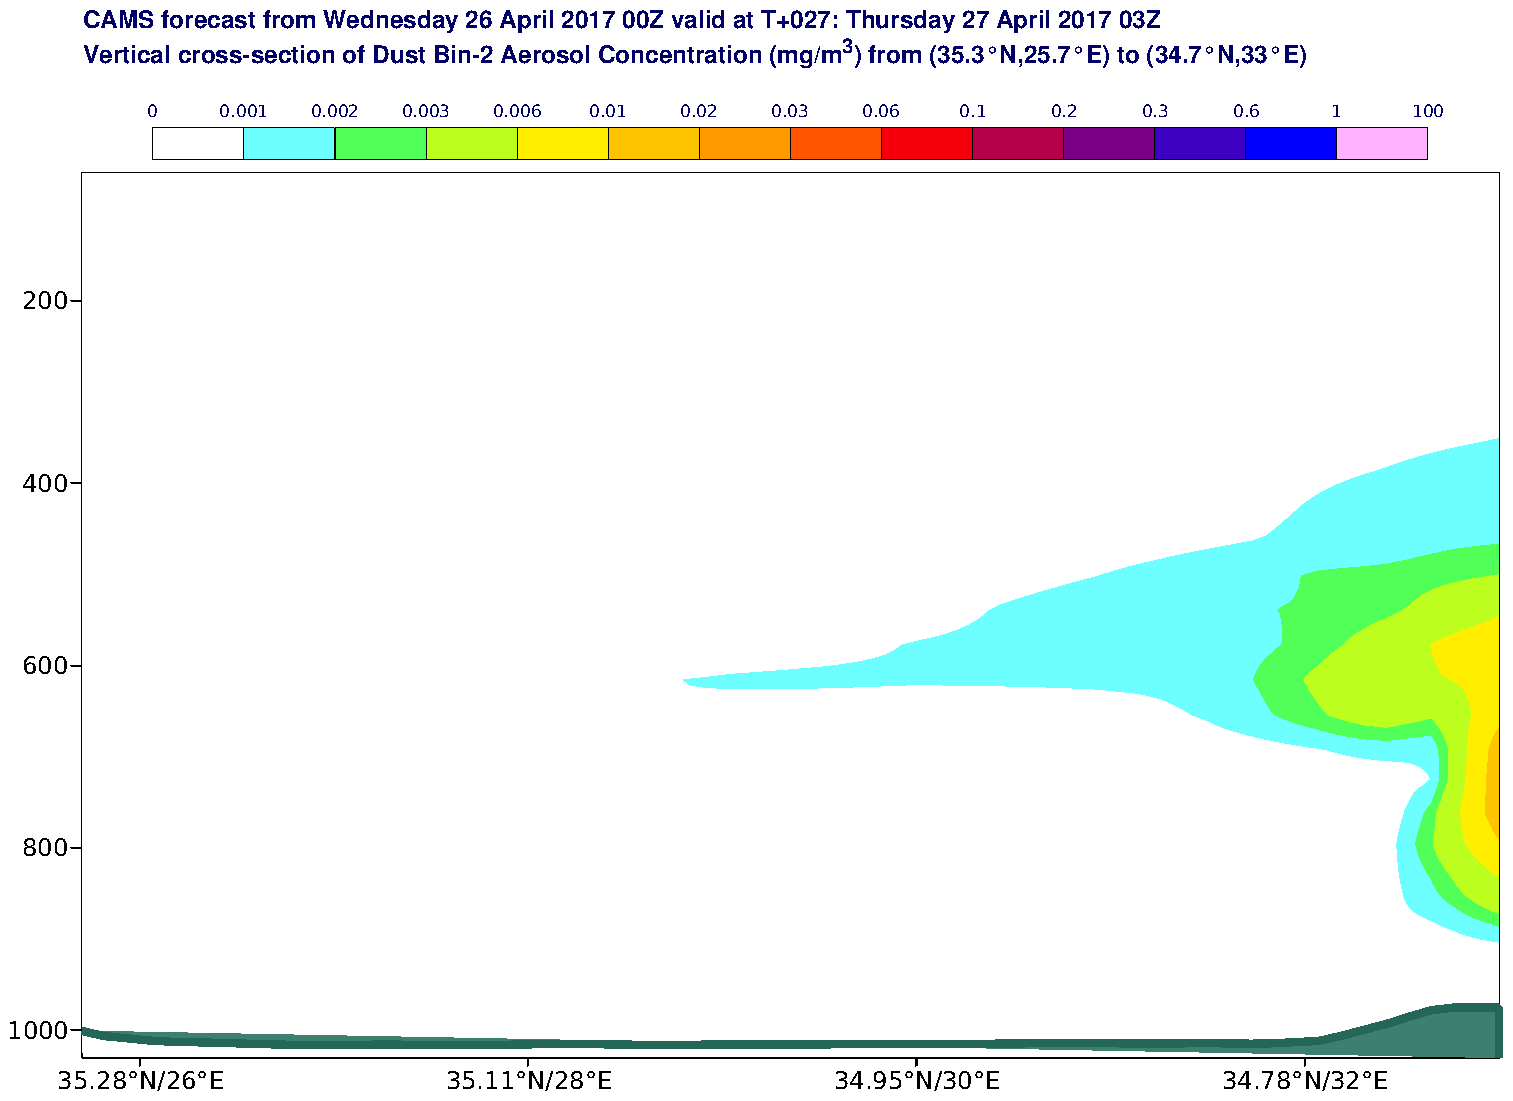 Vertical cross-section of Dust Bin-2 Aerosol Concentration (mg/m3) valid at T27 - 2017-04-27 03:00